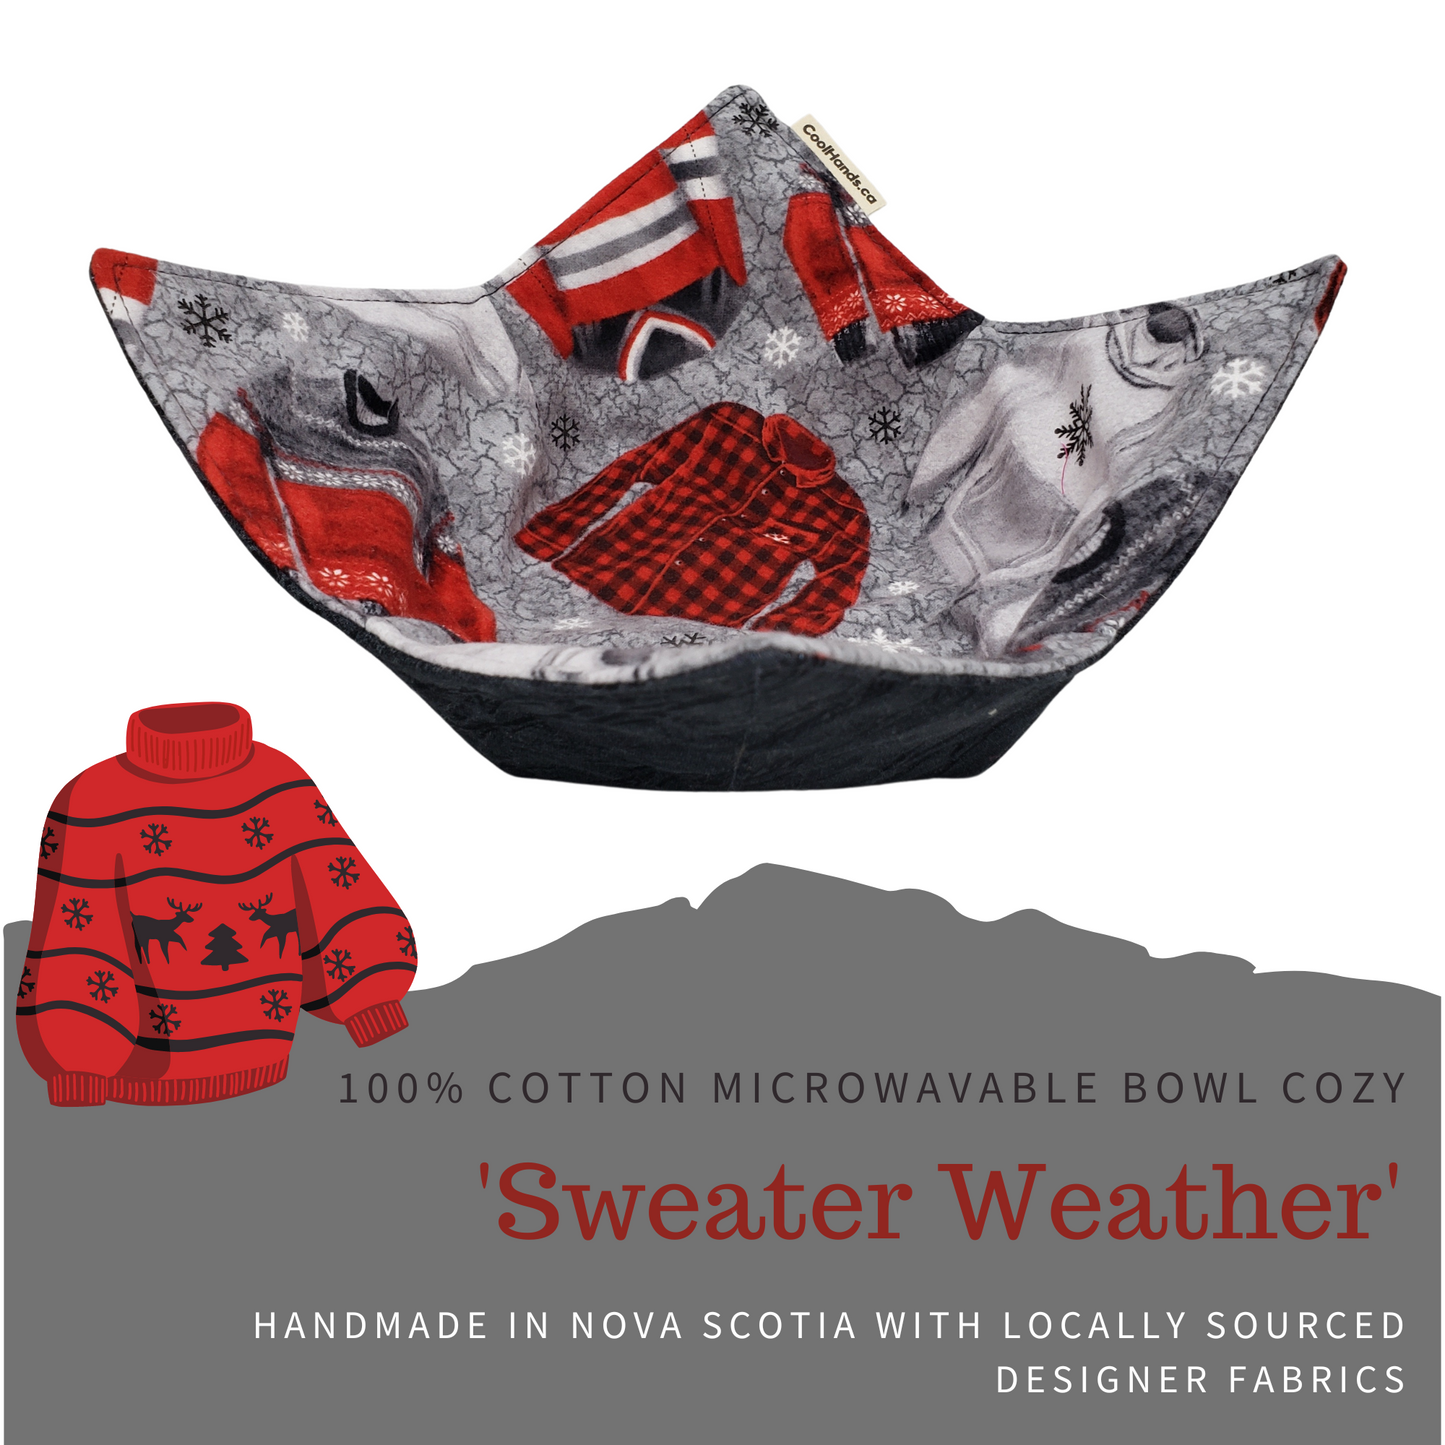 100% Cotton Microwavable Bowl Cozy - "Sweater Weather"